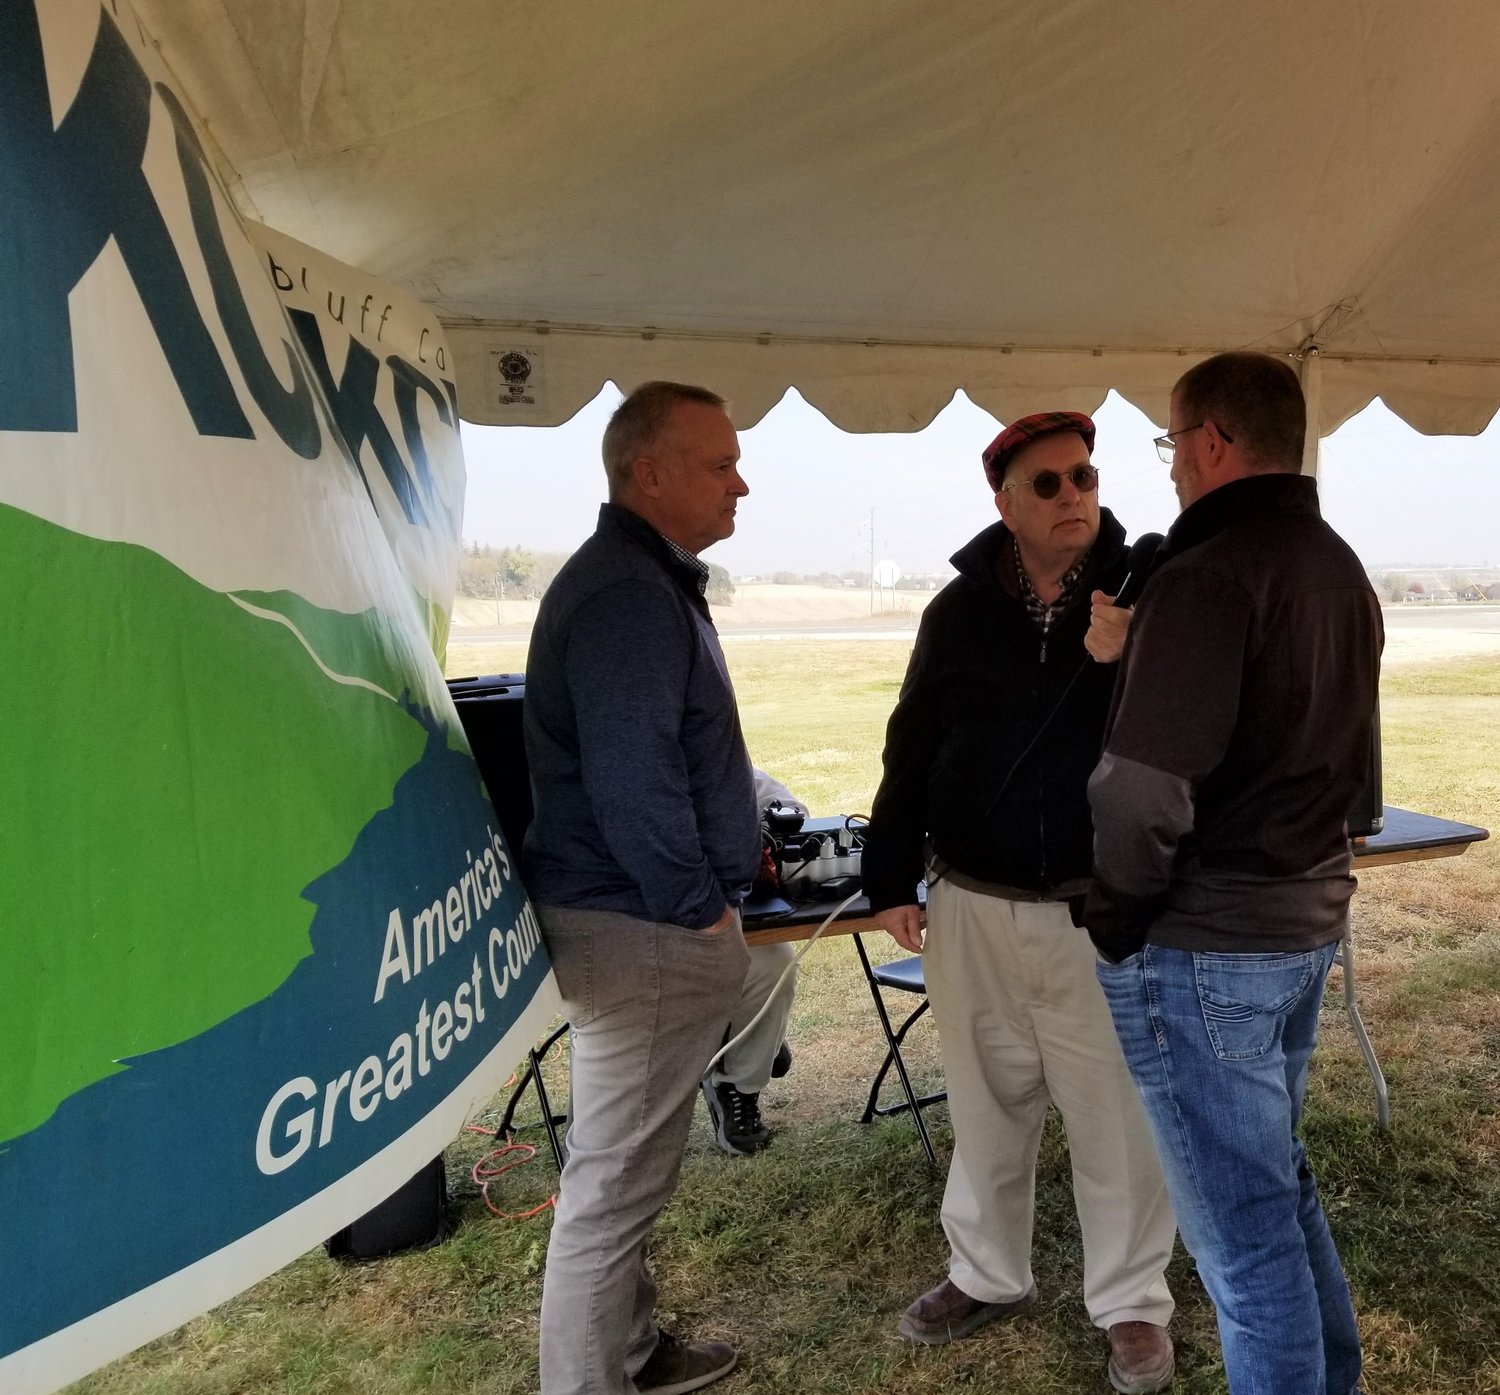 Jeff Stewart interviews First Farmers and Merchants bankers Paul Althoff and Paul Drackley as part of KCUE’s Harvest Lunch live broadcast.